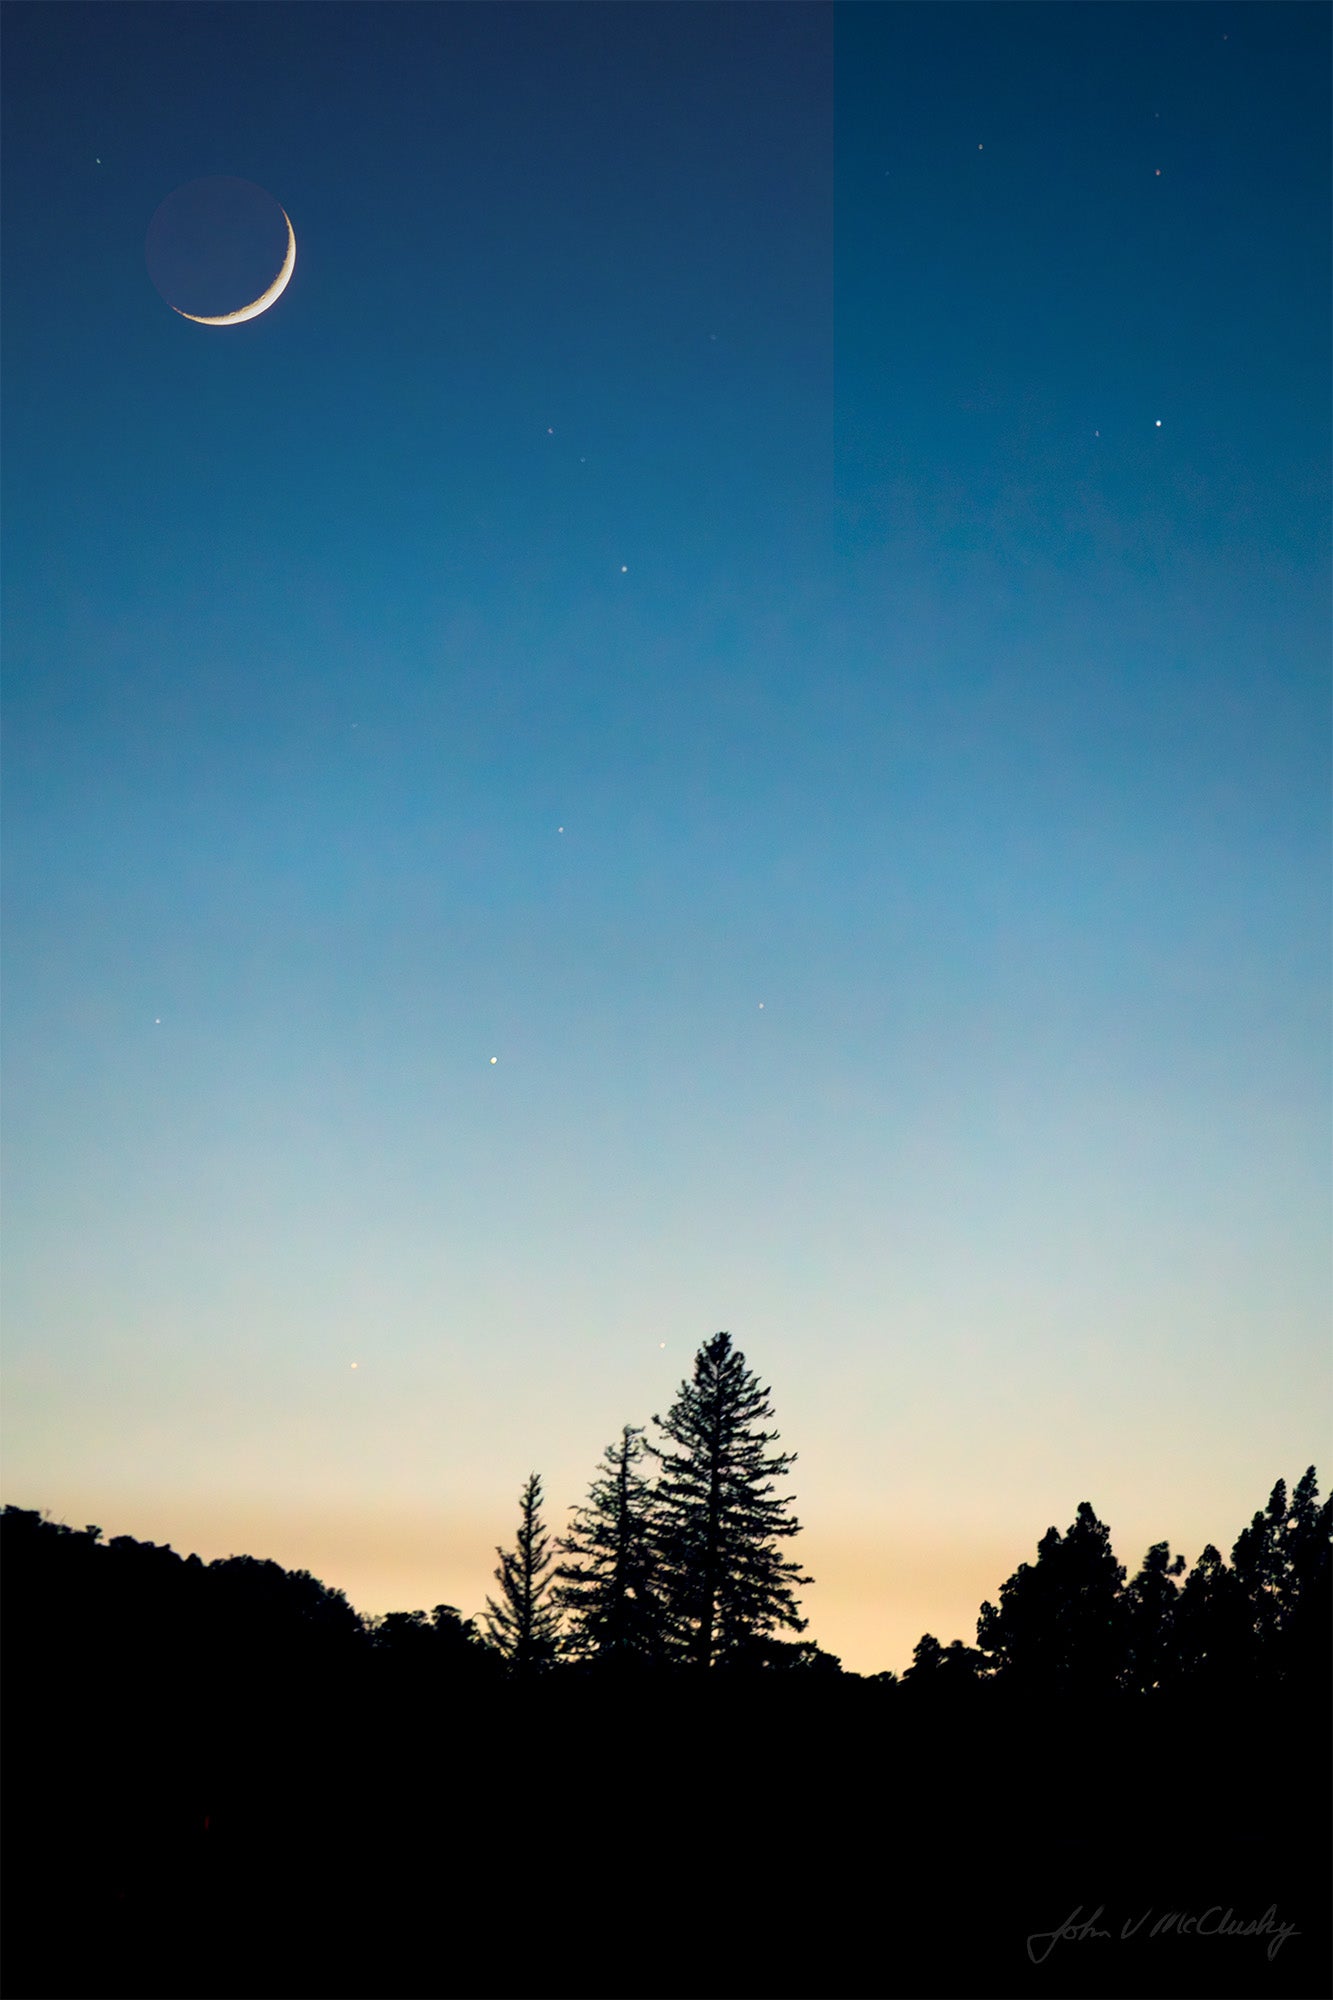 A crescent moon hangs in a blue dusk sky with stars, silhouetting a cluster of pine trees in this fine art nature print.